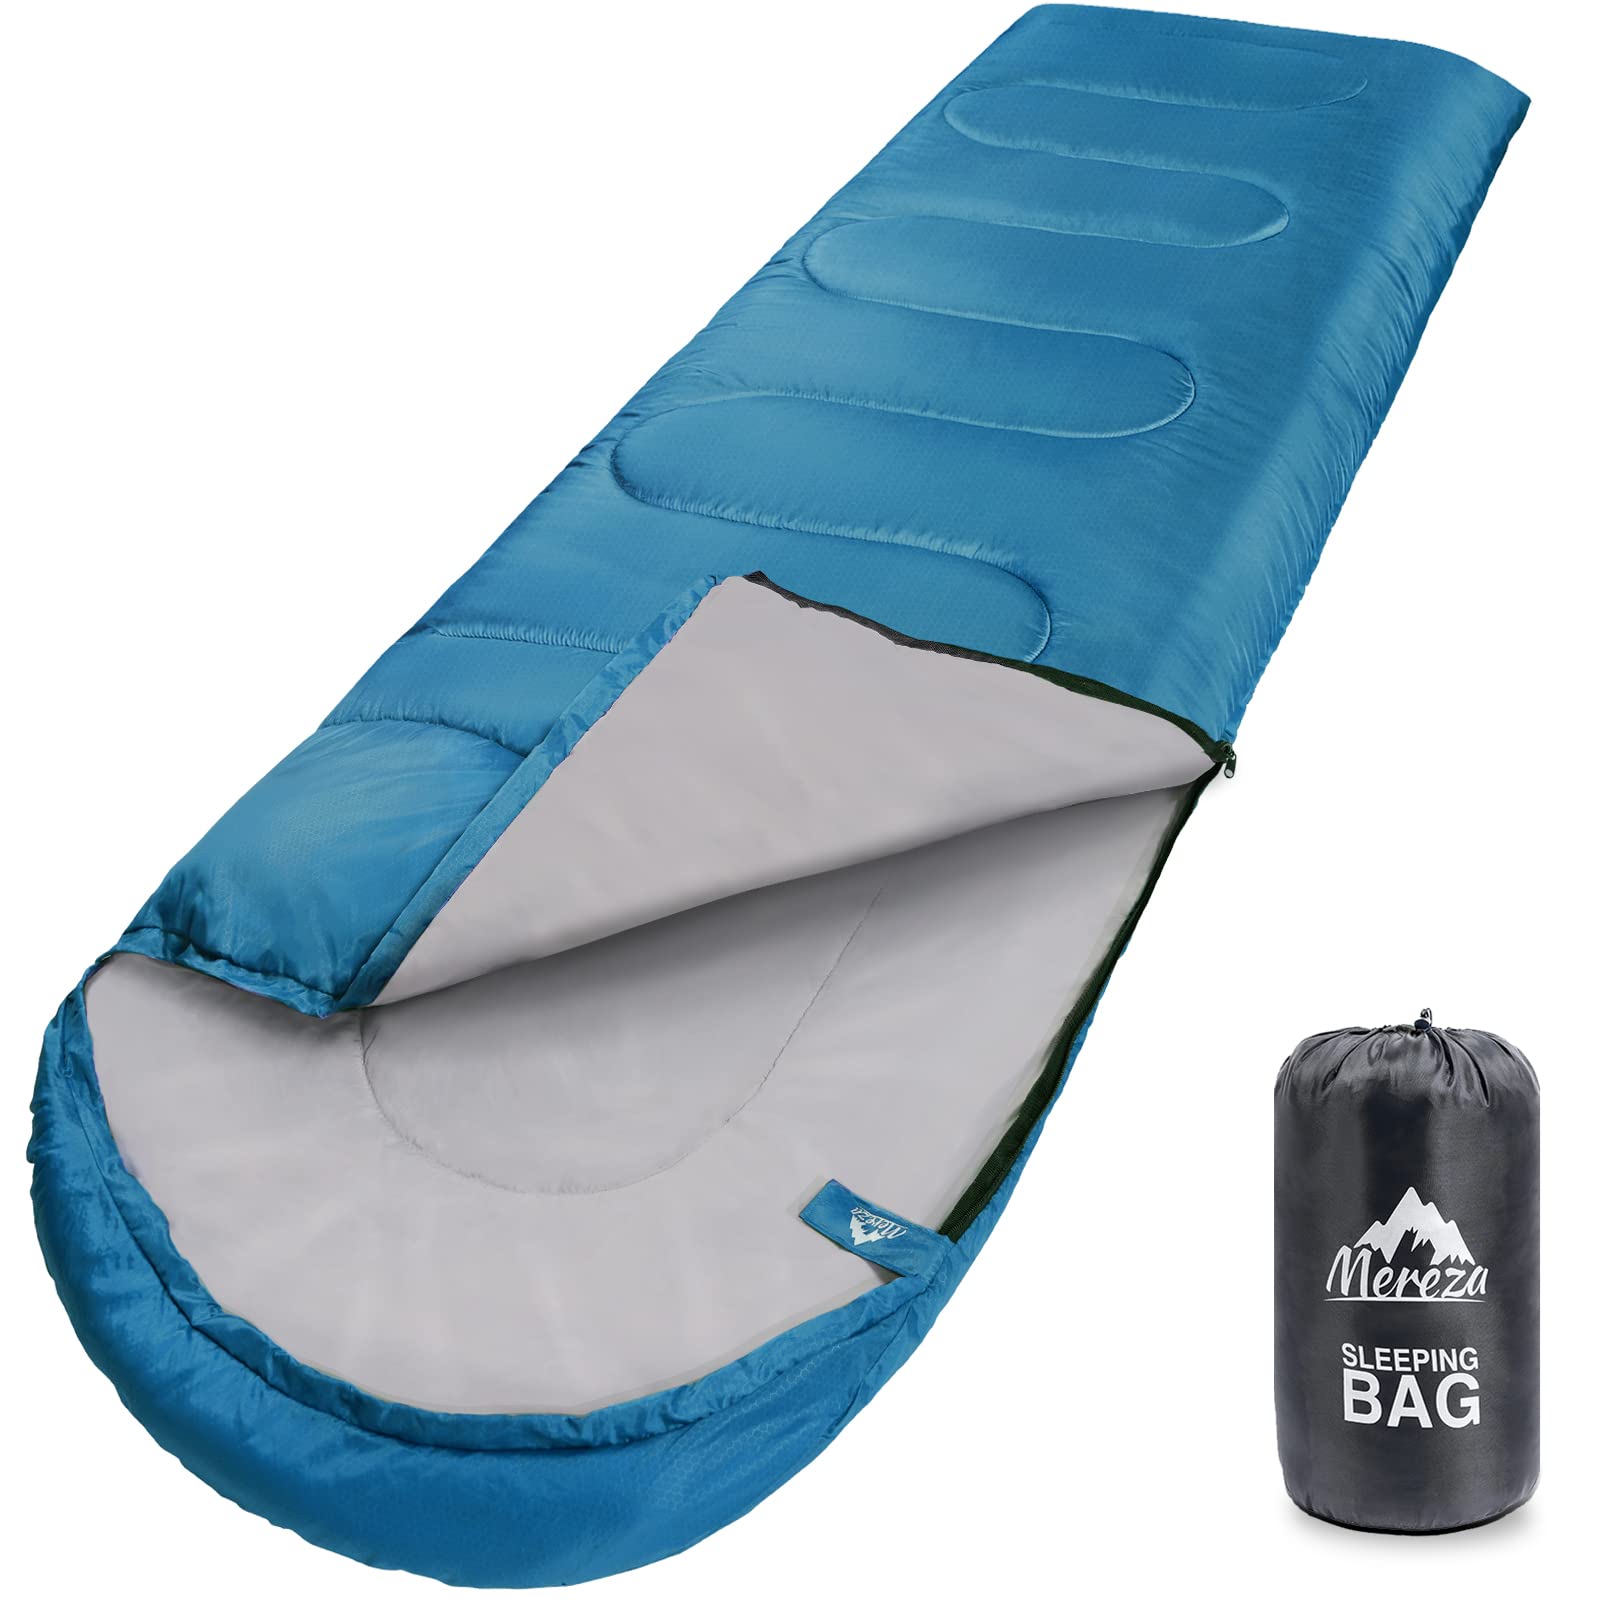 RhinoKraft 3 Season Warm & Cool Weather for Camping and Travelling  Lightweight Sleeping Bag for Adults